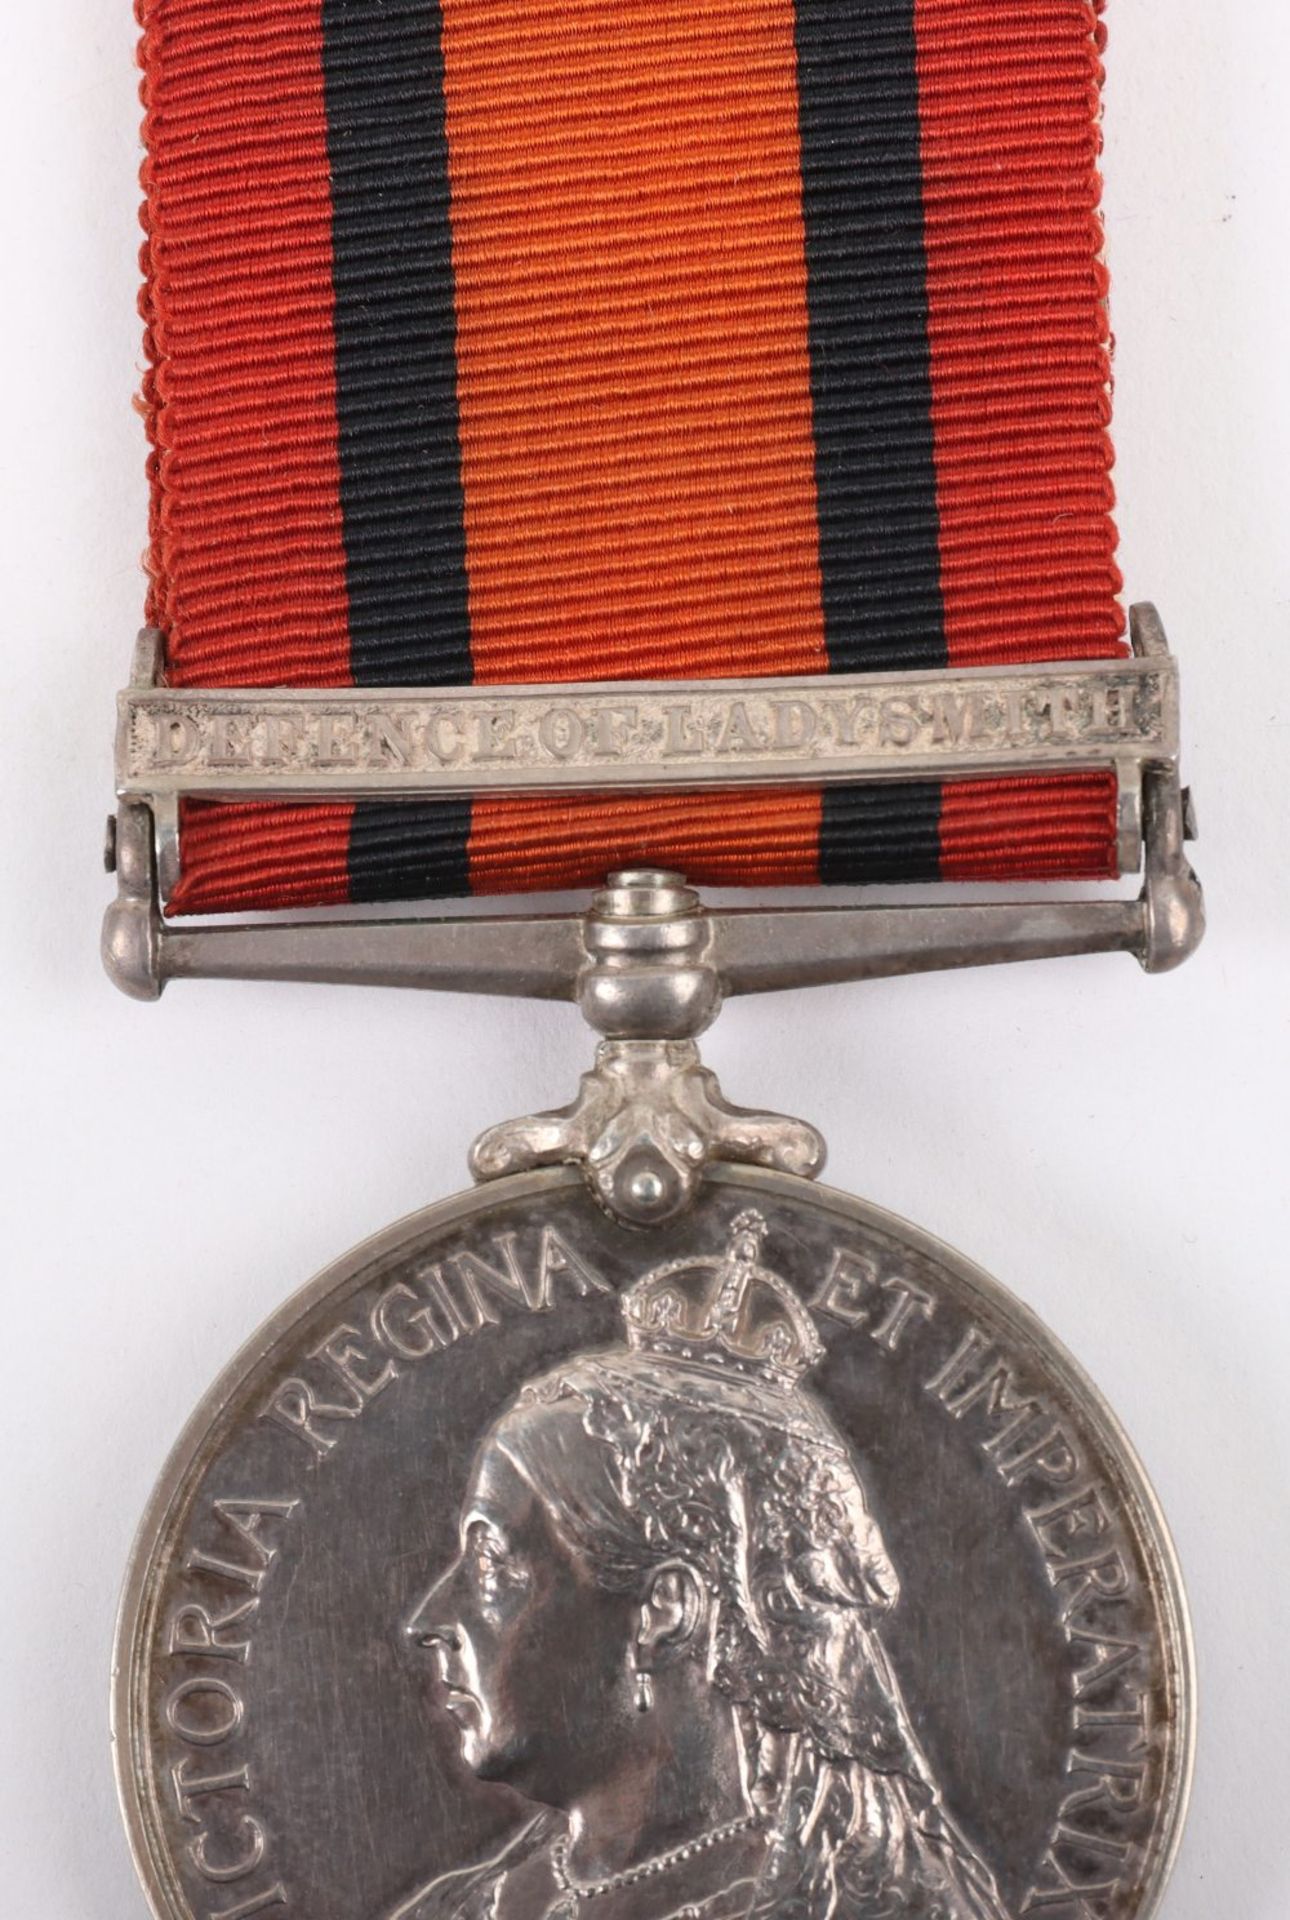 Queens South Africa Medal Awarded to the Natal Naval Volunteers for the Defence of Ladysmith - Image 3 of 4